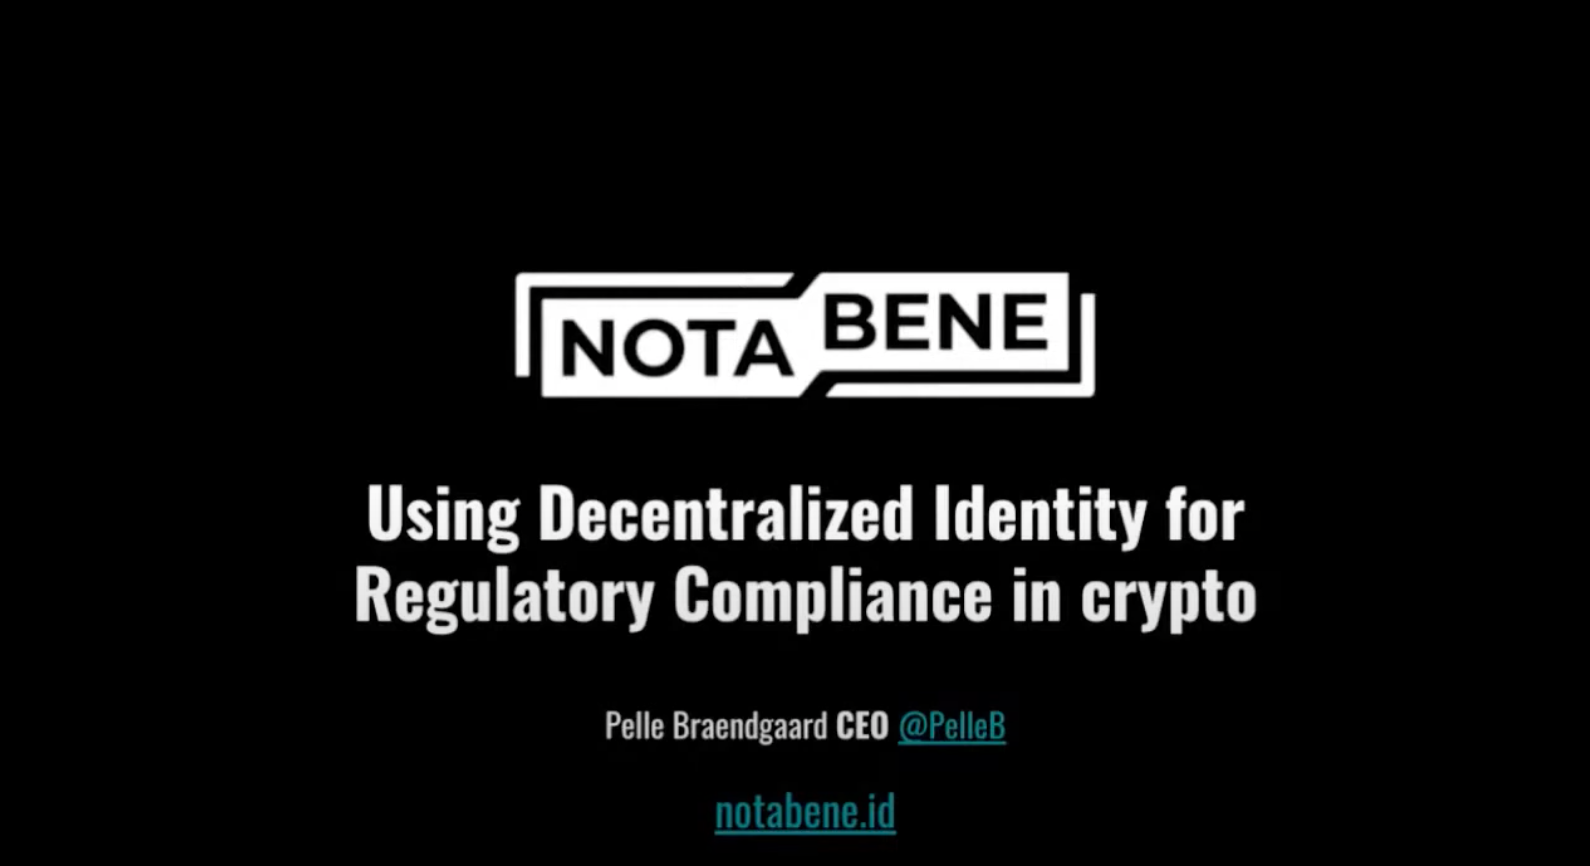 DIN Meeting with Notabene ID